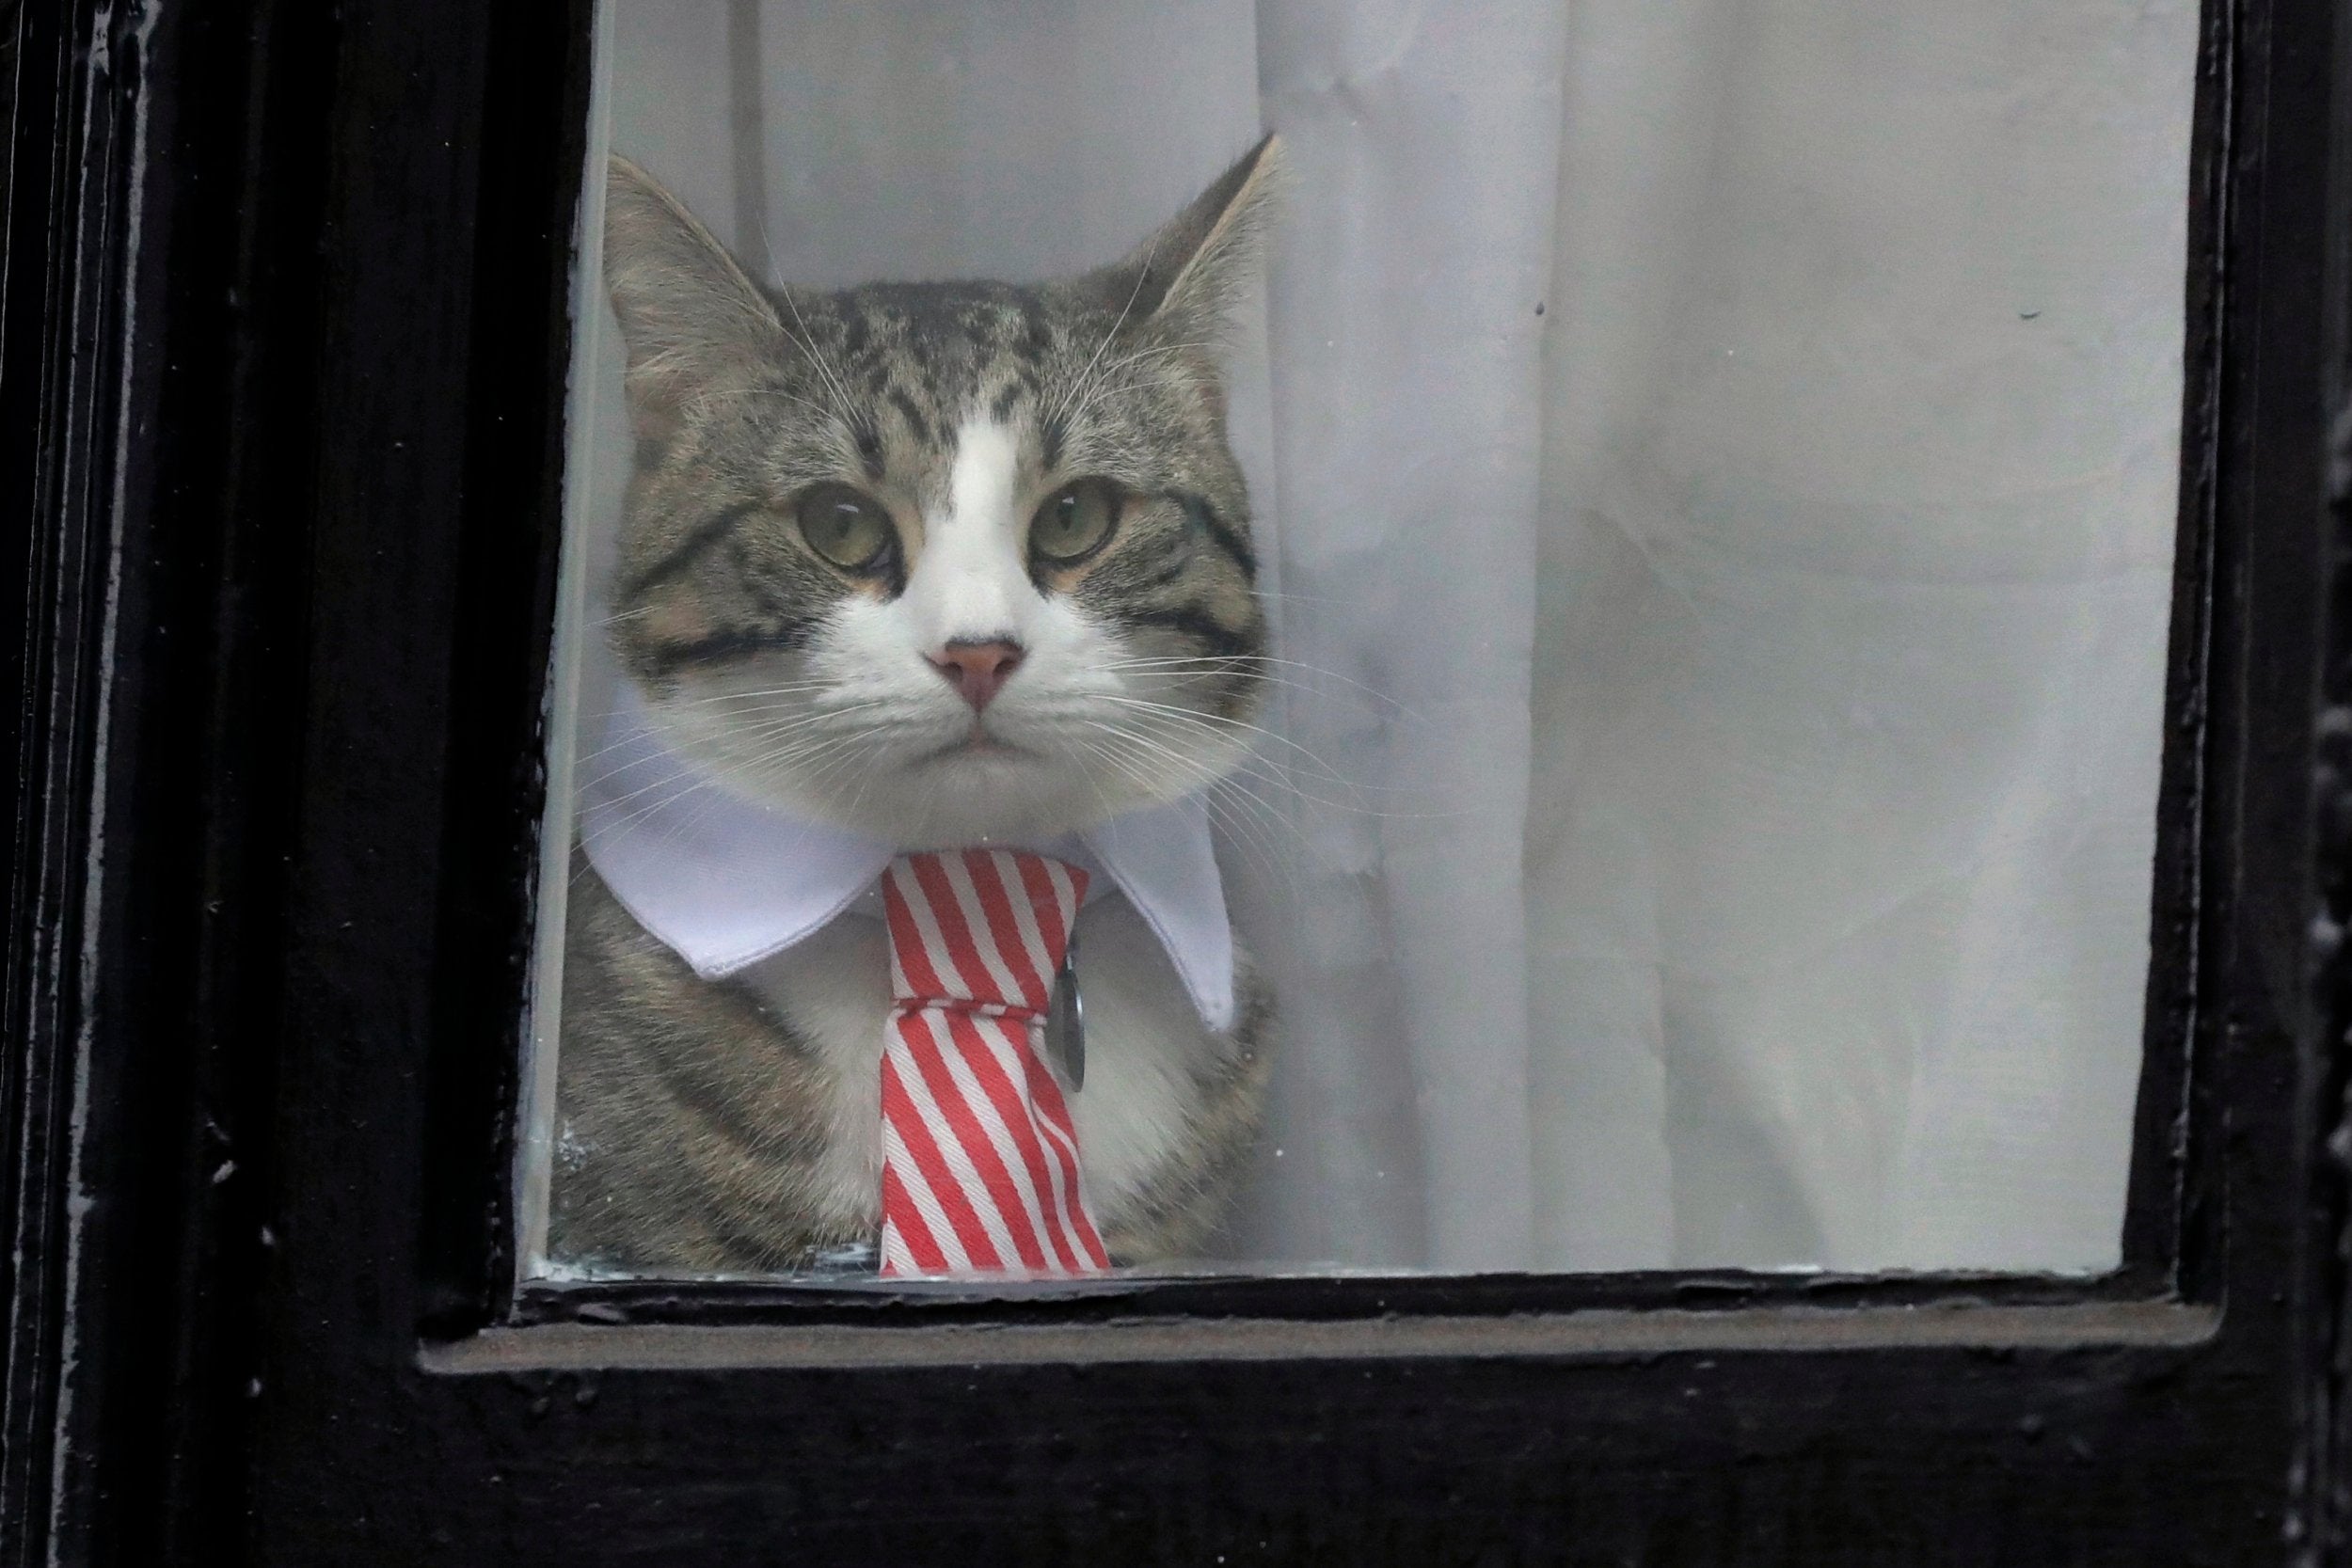 Julian Assange's cat dressed in a collar and tie looks out from a window of the Ecuadorian embassy in London